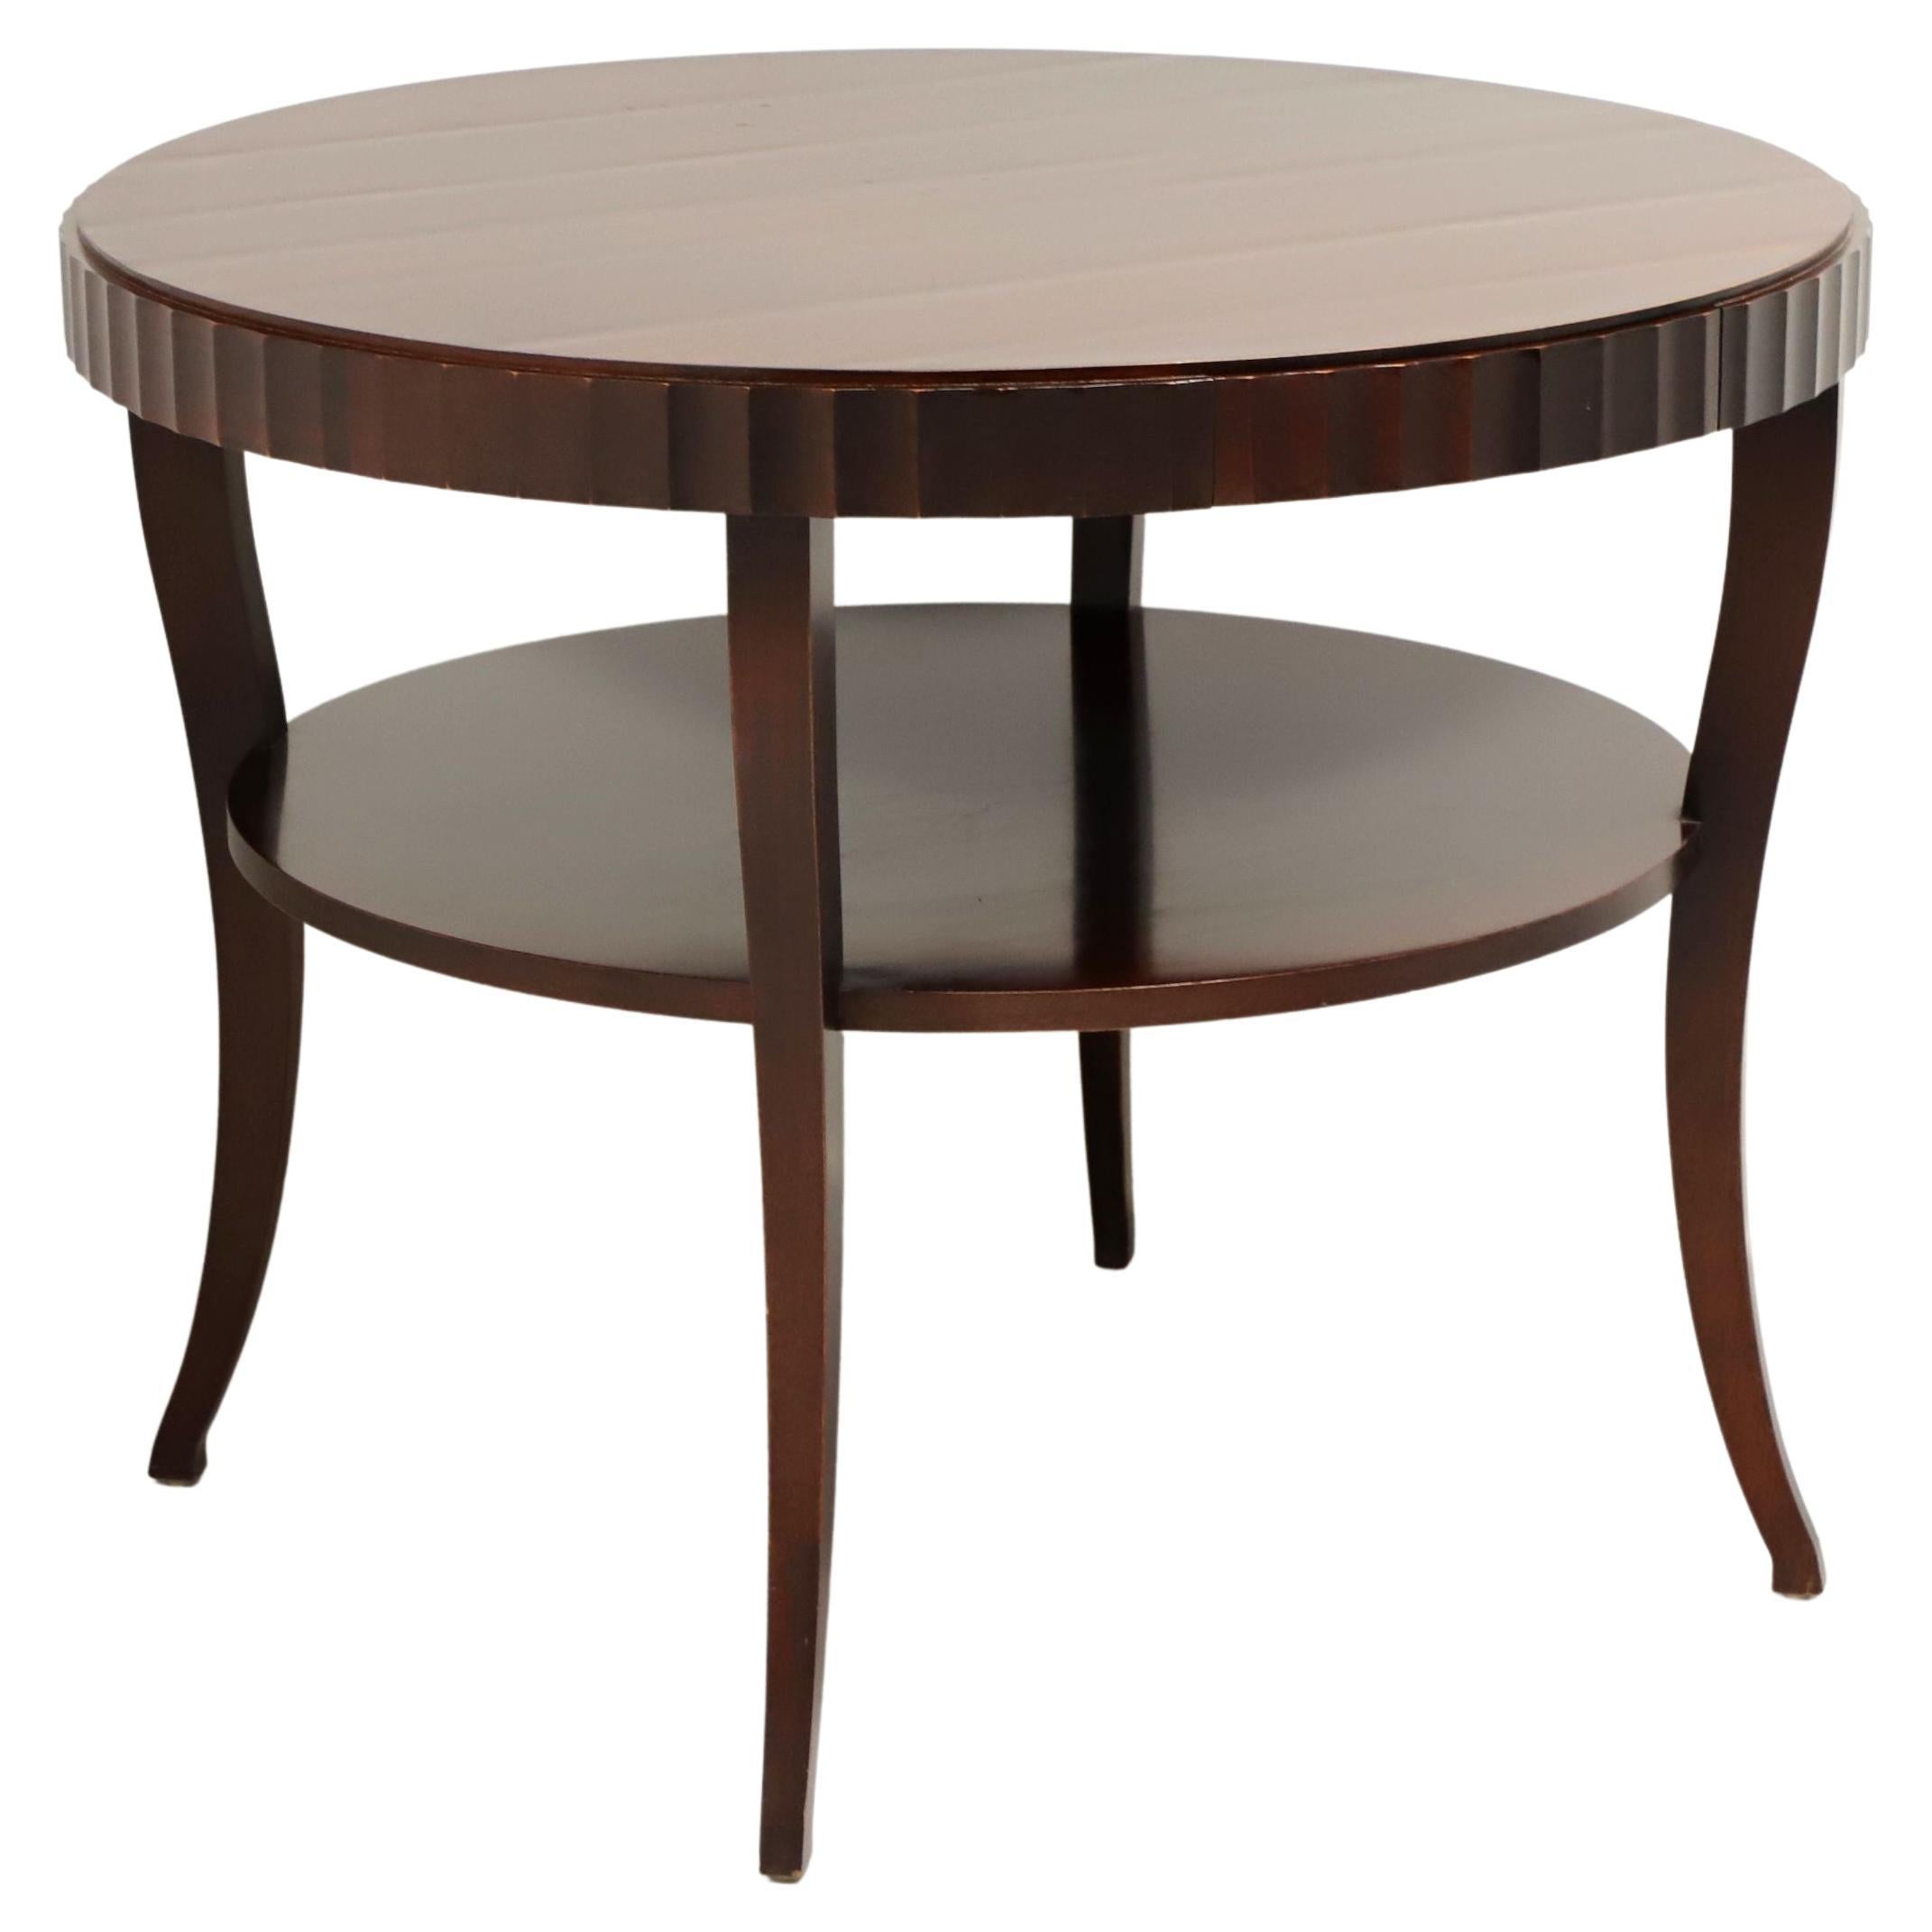 Barbara Barry for Baker Contemporary Mahogany Round Two-Tier Center Accent Table